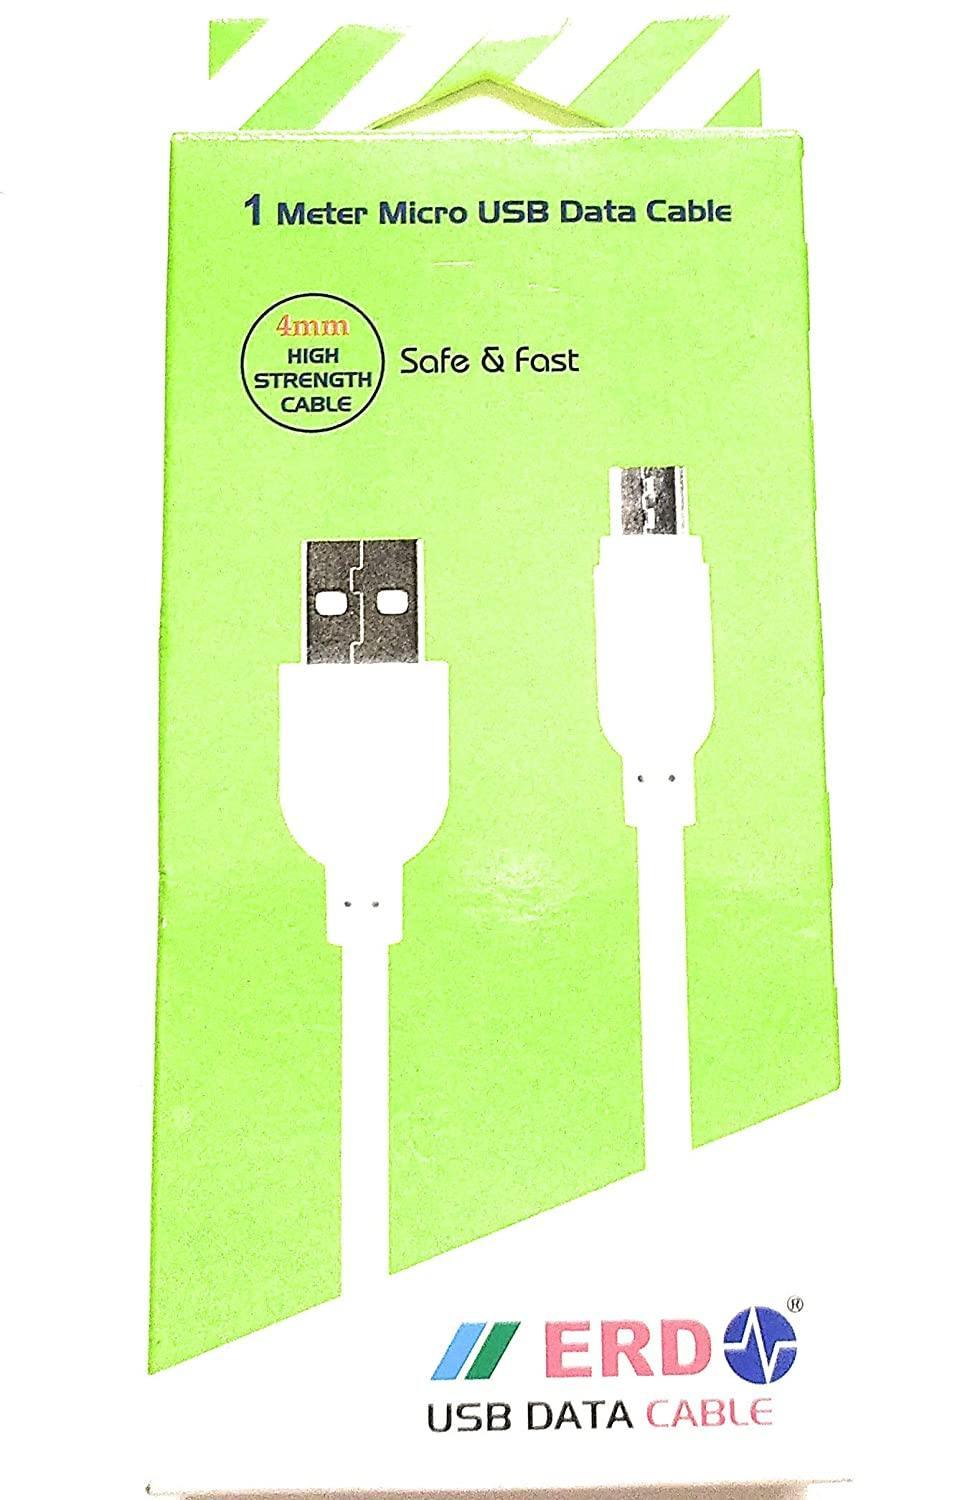 ERD UC-21 MicroUSB Data Cable for All Smartphones-Datacable & Chargers-dealsplant